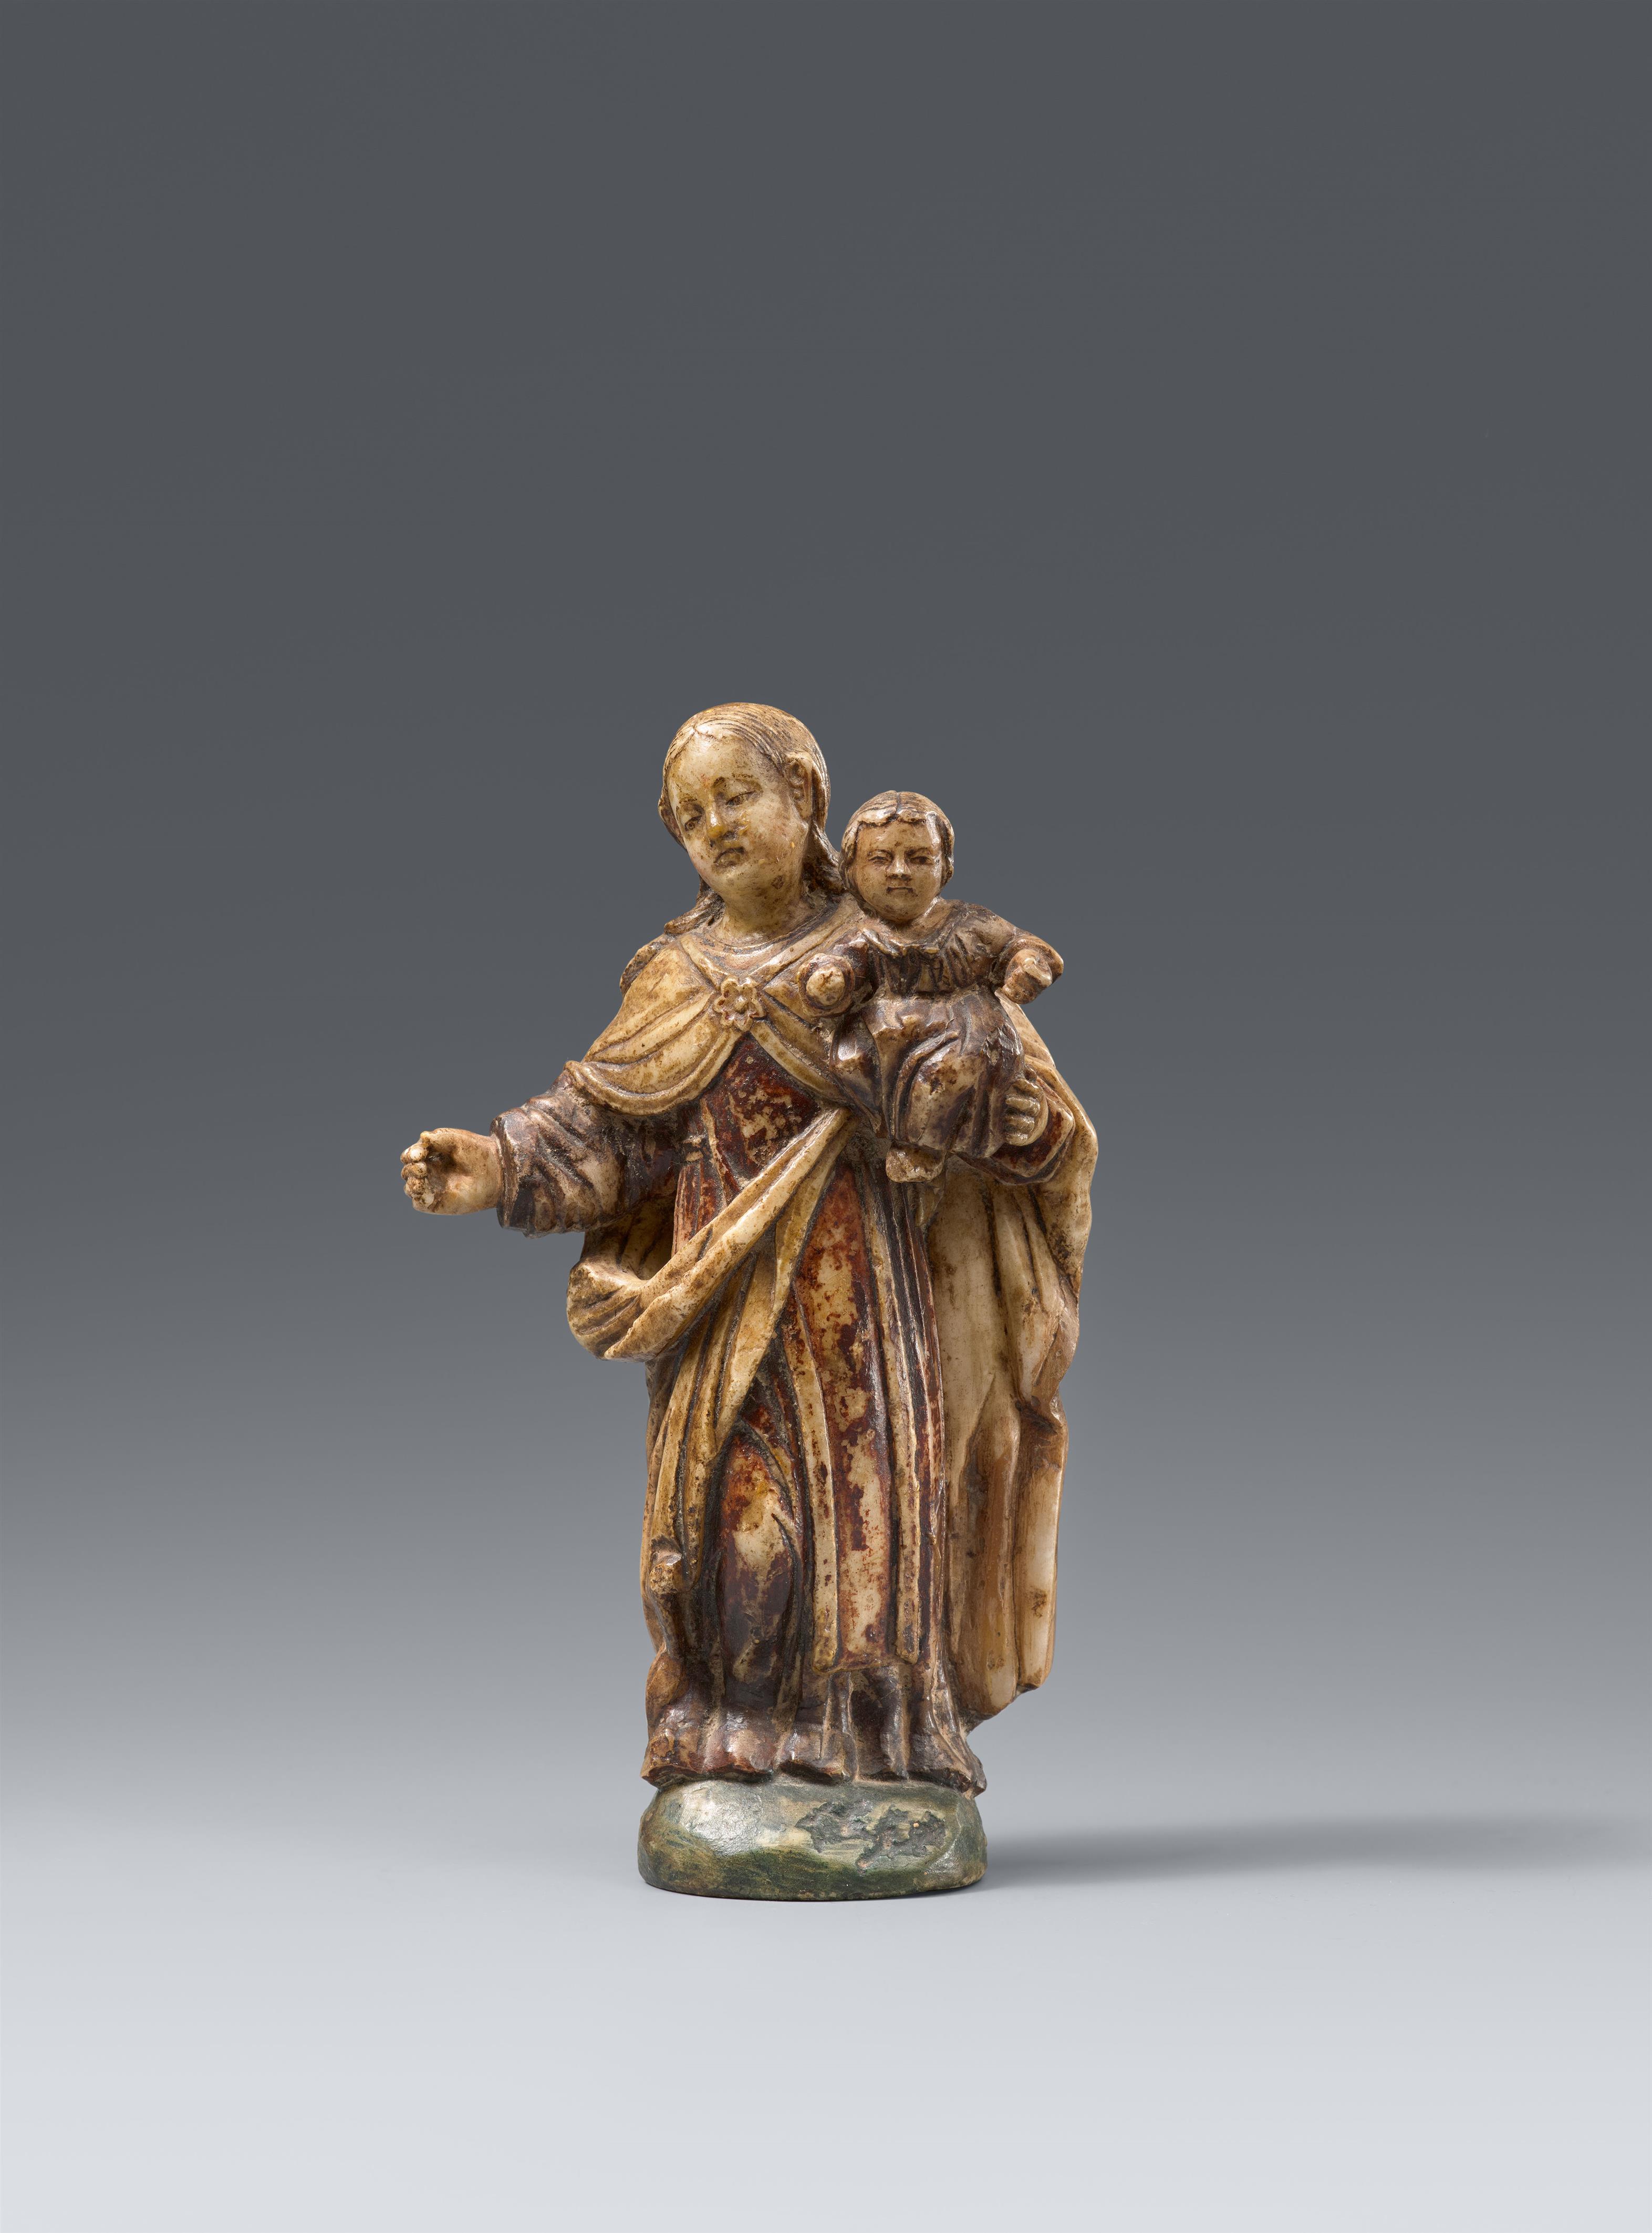 Iberisch-Kolonial 17th or 18th century - A stone figure of the Virgin and Child, Iberian-Colonial, 17th-18th century - image-1